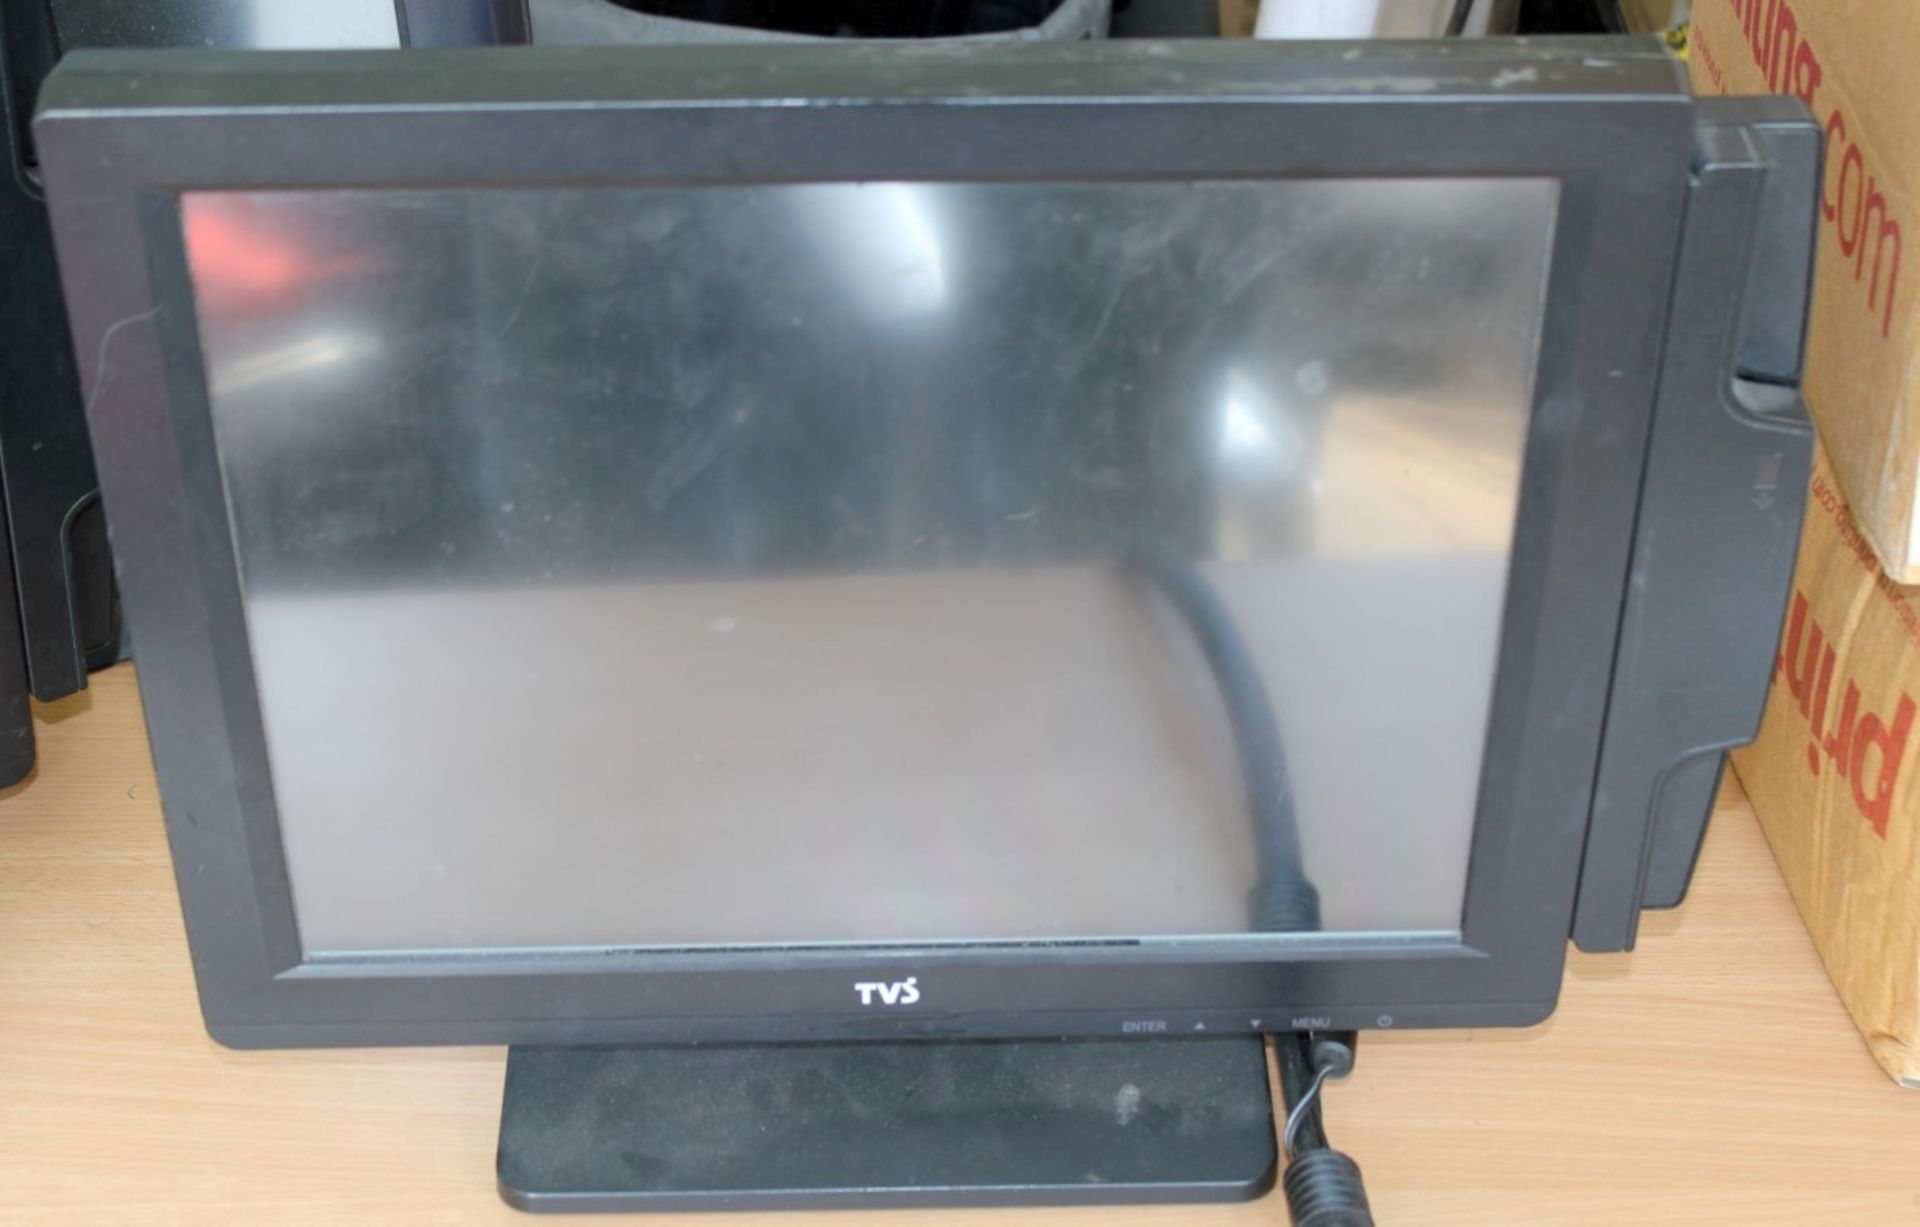 1 x TVS Touch Screen 15 Inch Point of Sale Monitor With Card Reader - Model LP-15E32 - From